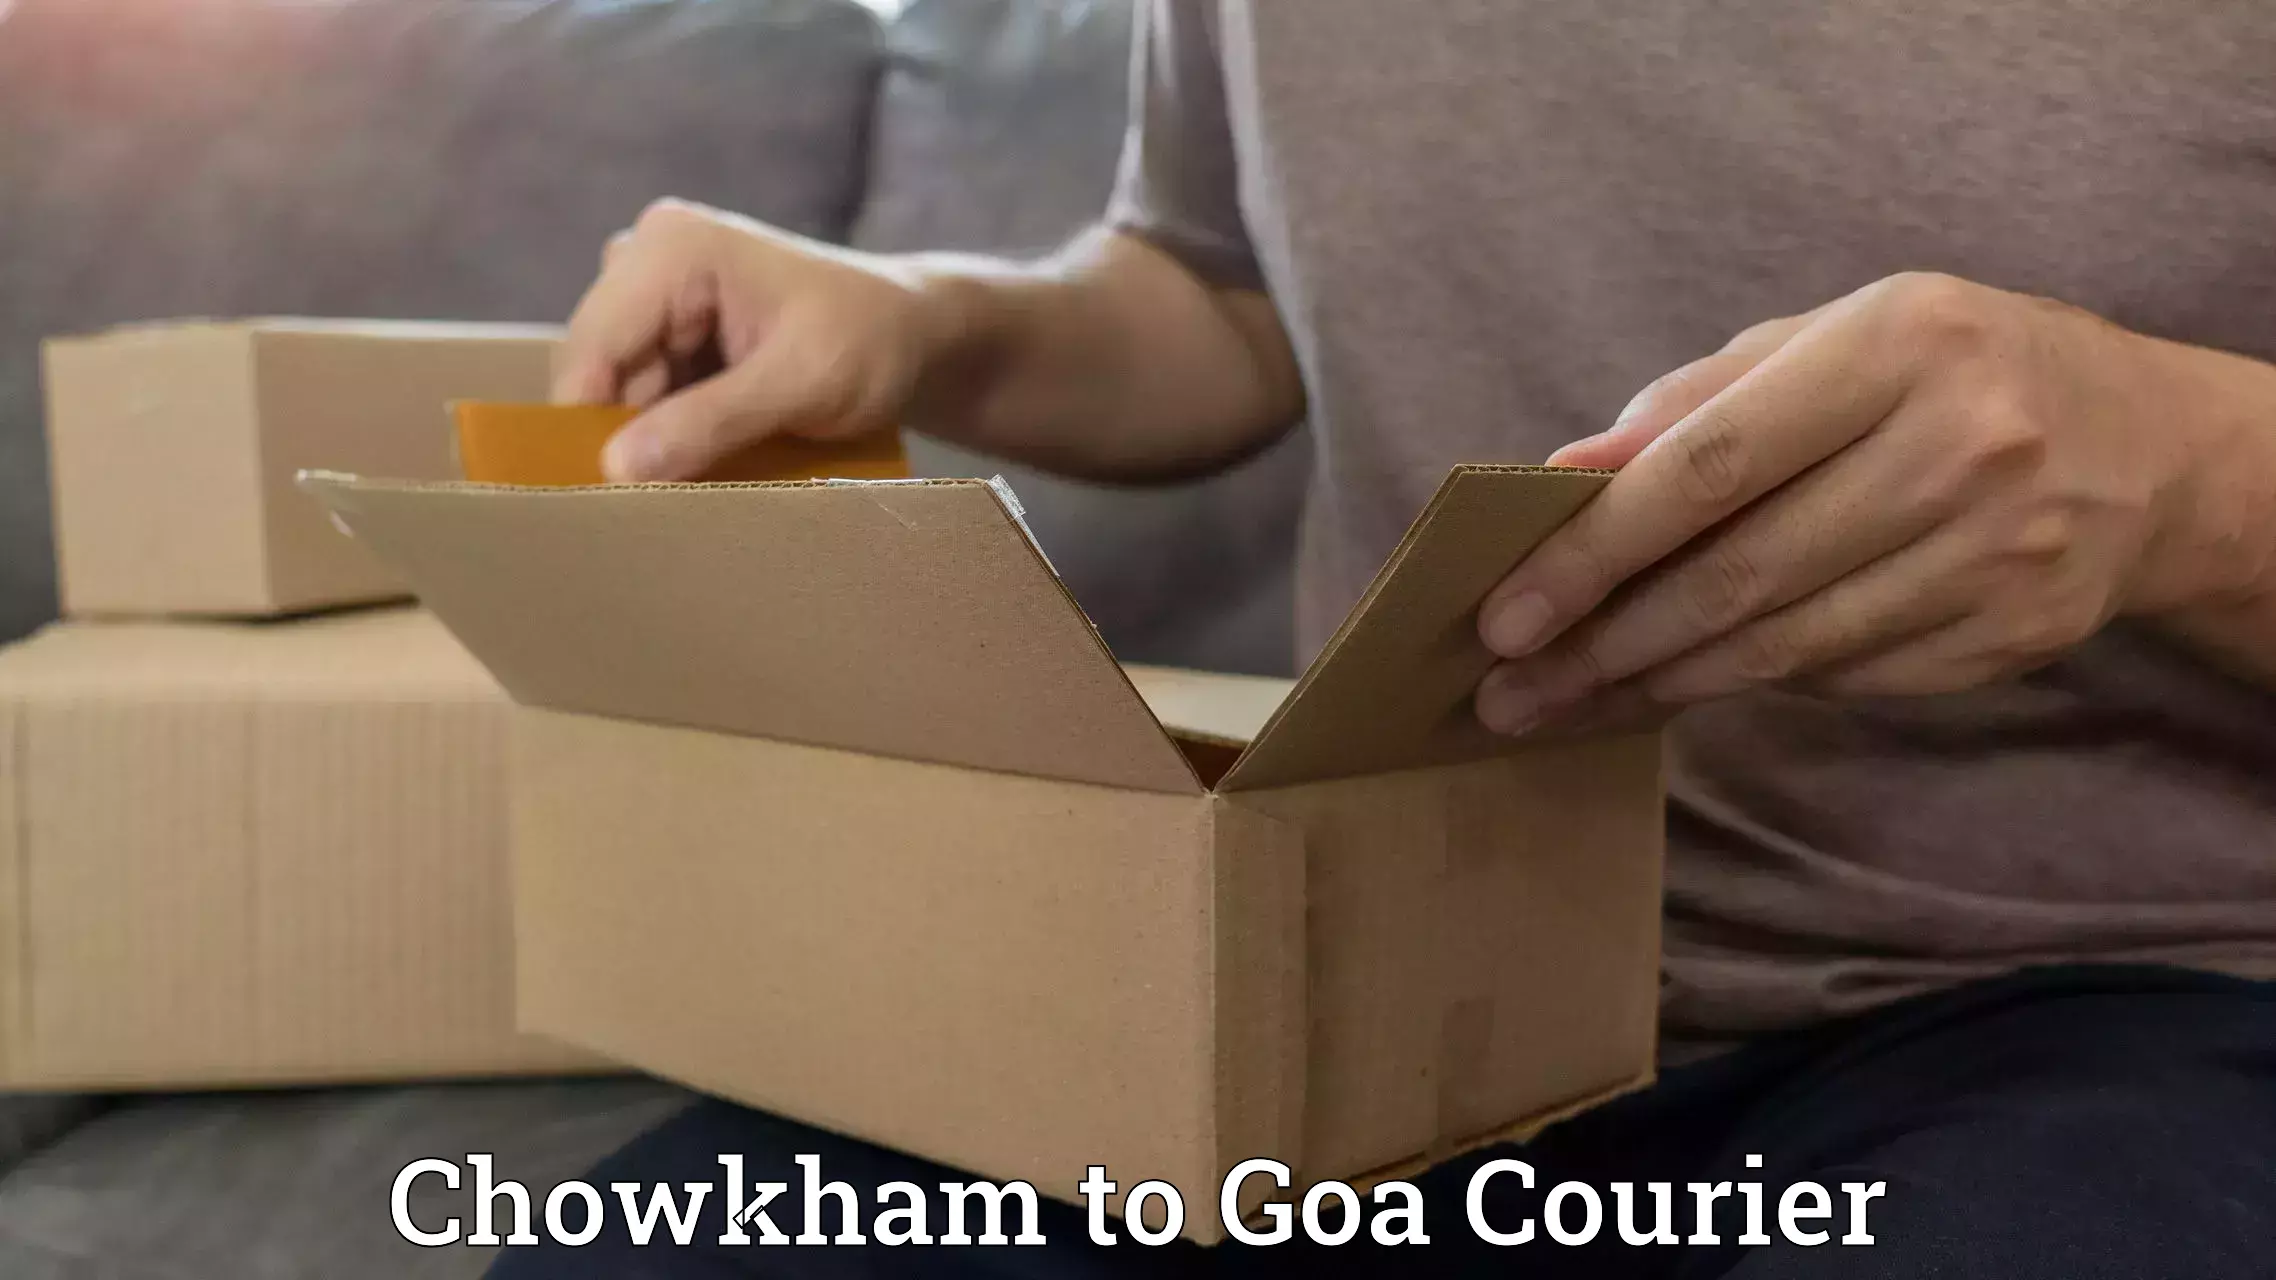 Courier service innovation Chowkham to Panaji